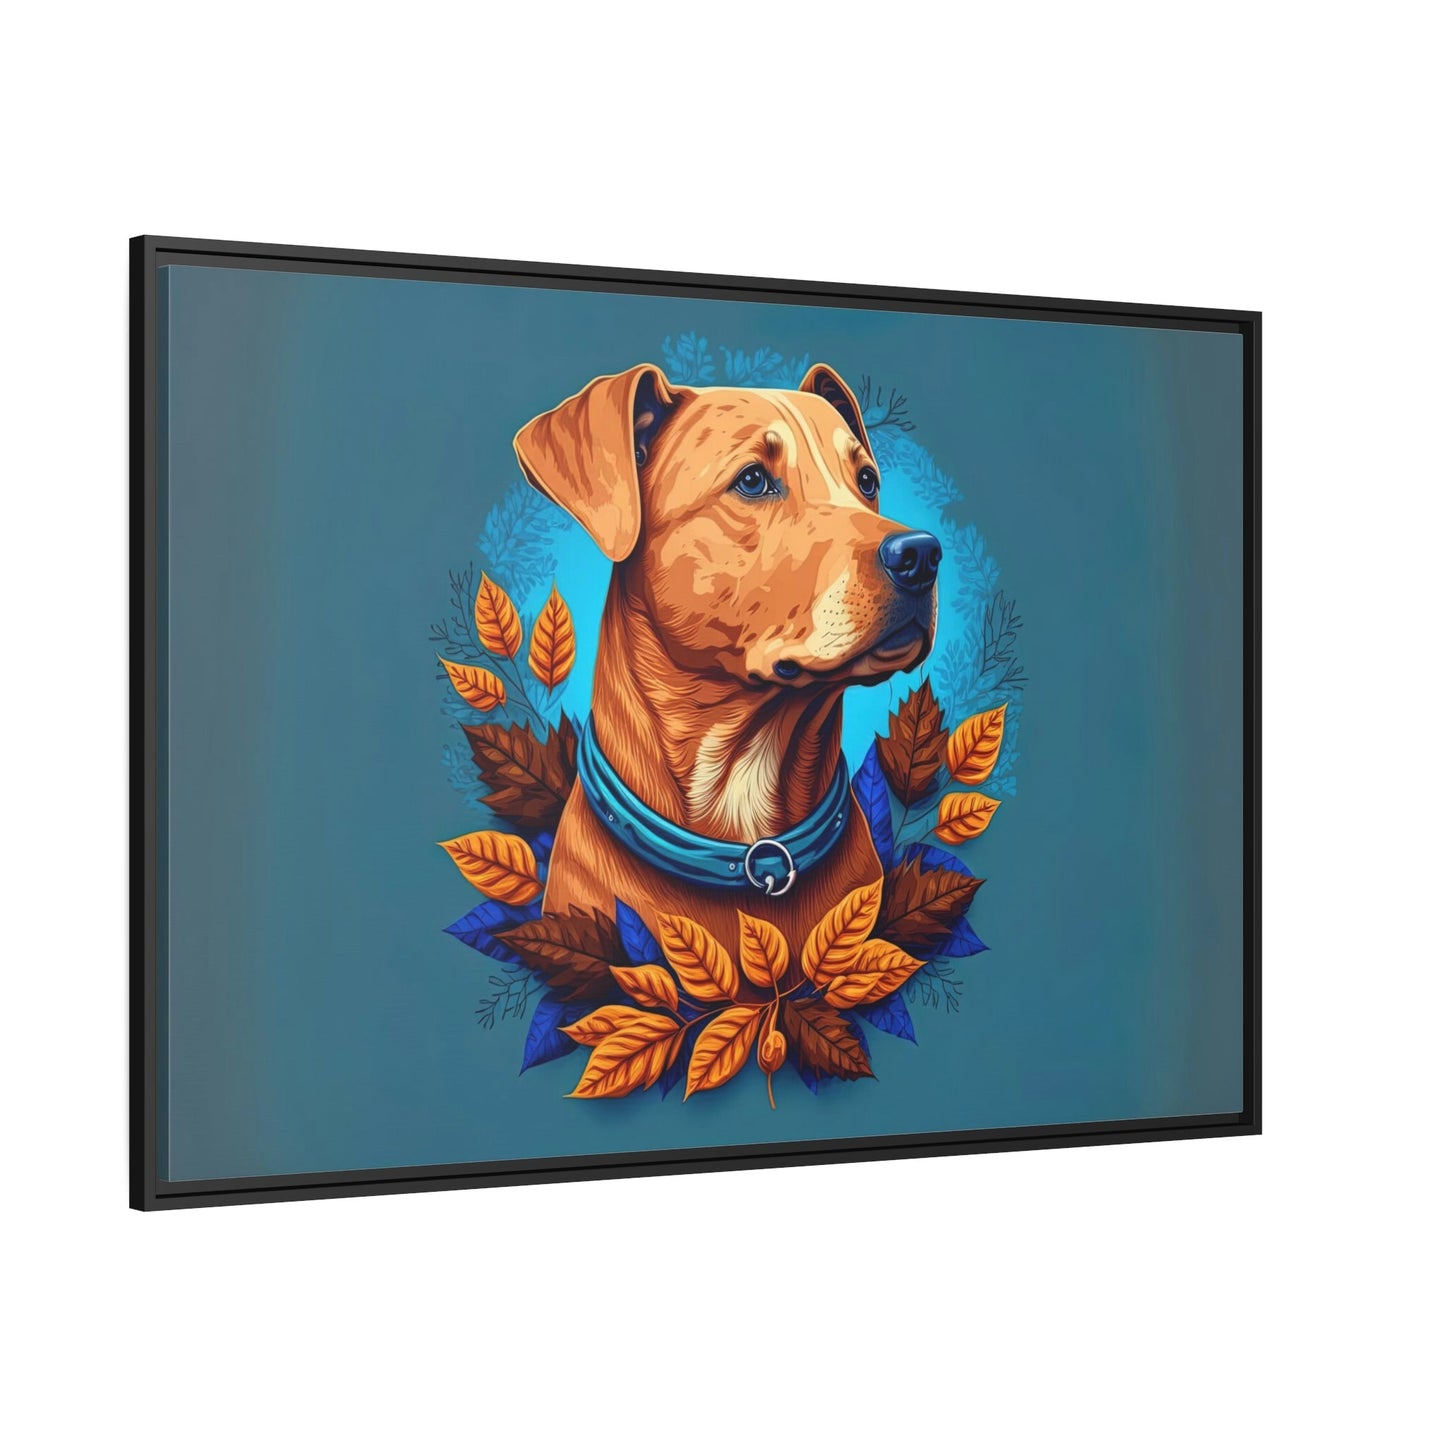 Puppy Love: Print on Canvas of Adorable Puppies on Framed Canvas